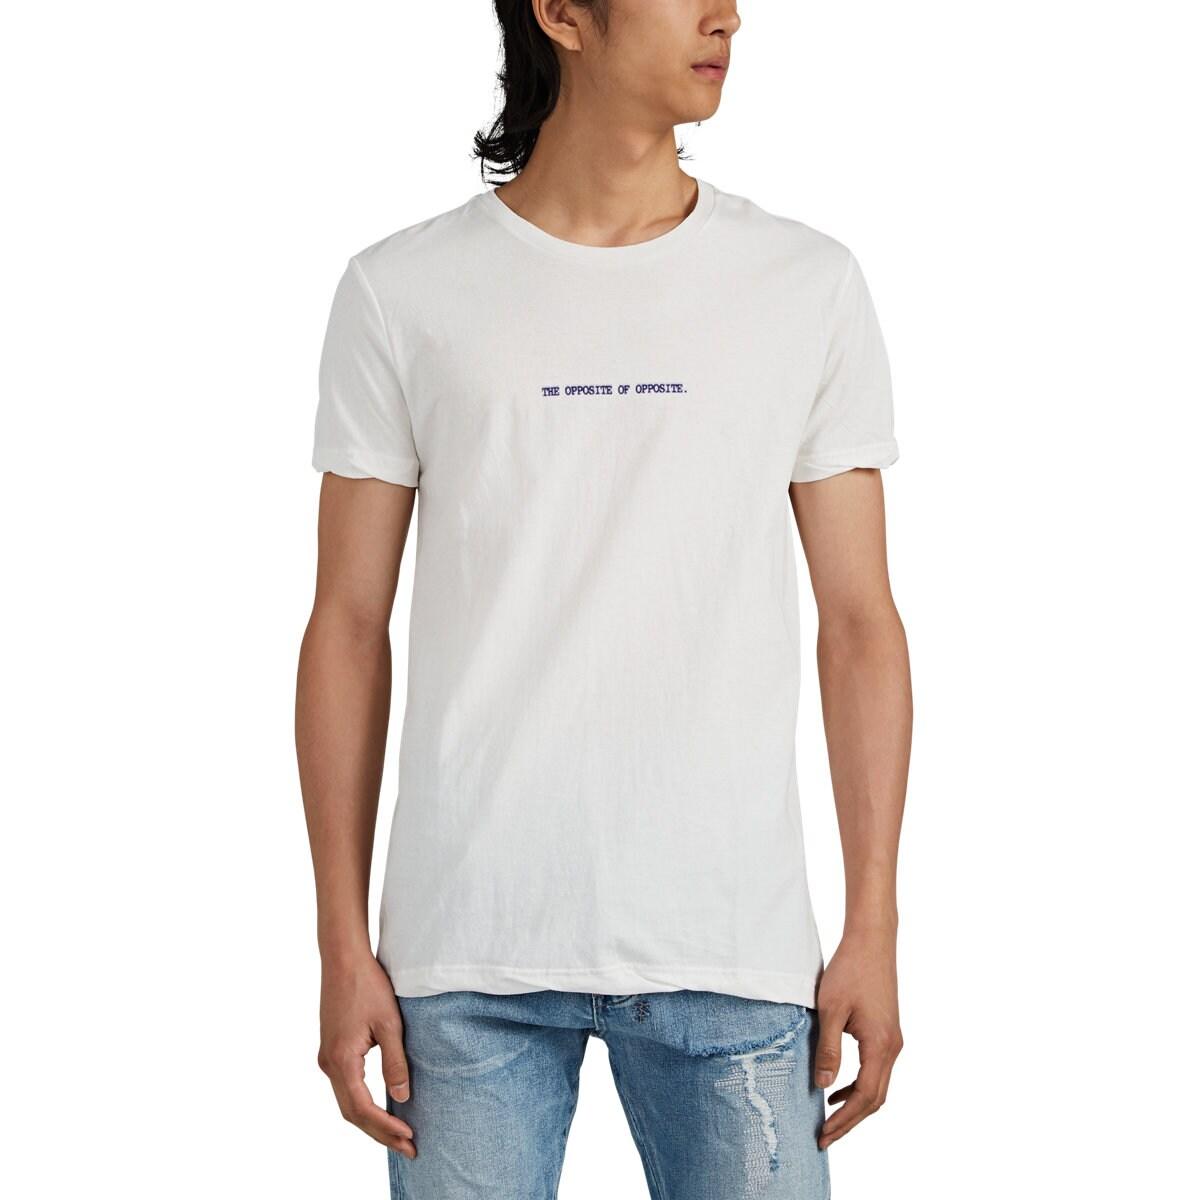 Ksubi in A Movie Cotton T-shirt in White for Men - Lyst